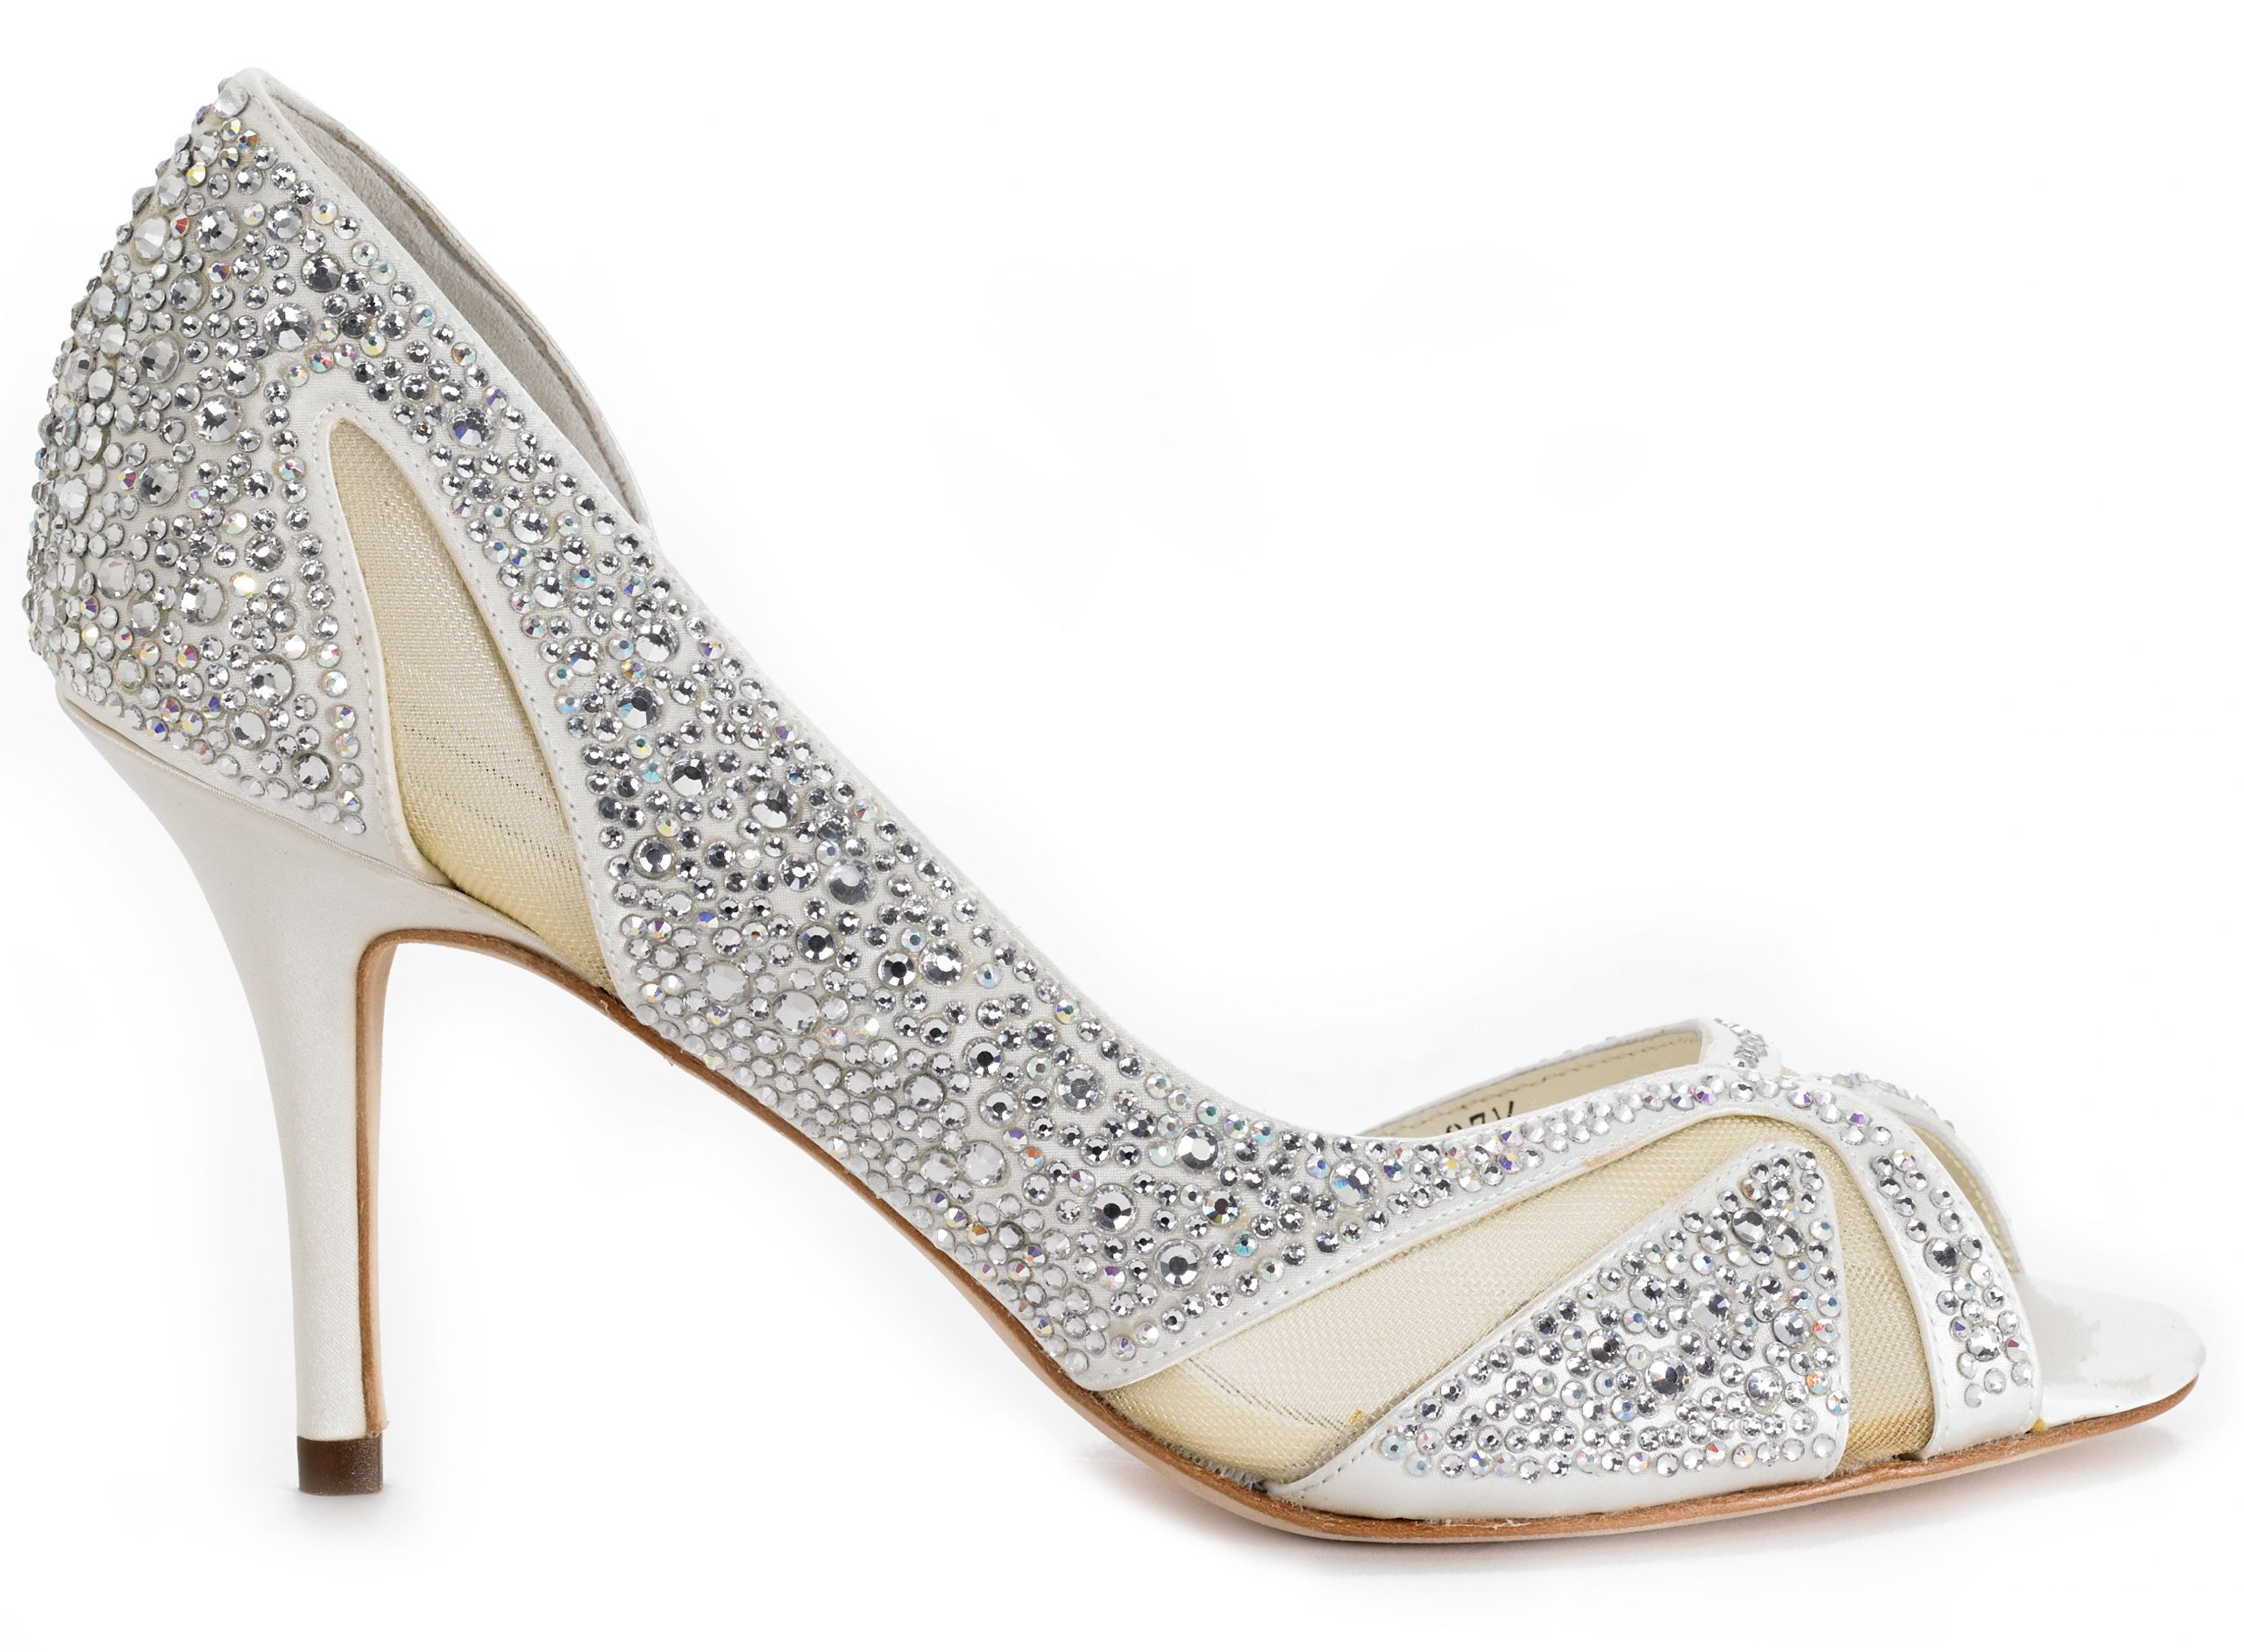 Shoes For A Wedding
 Choose The Perfect Wedding Shoes For Bride